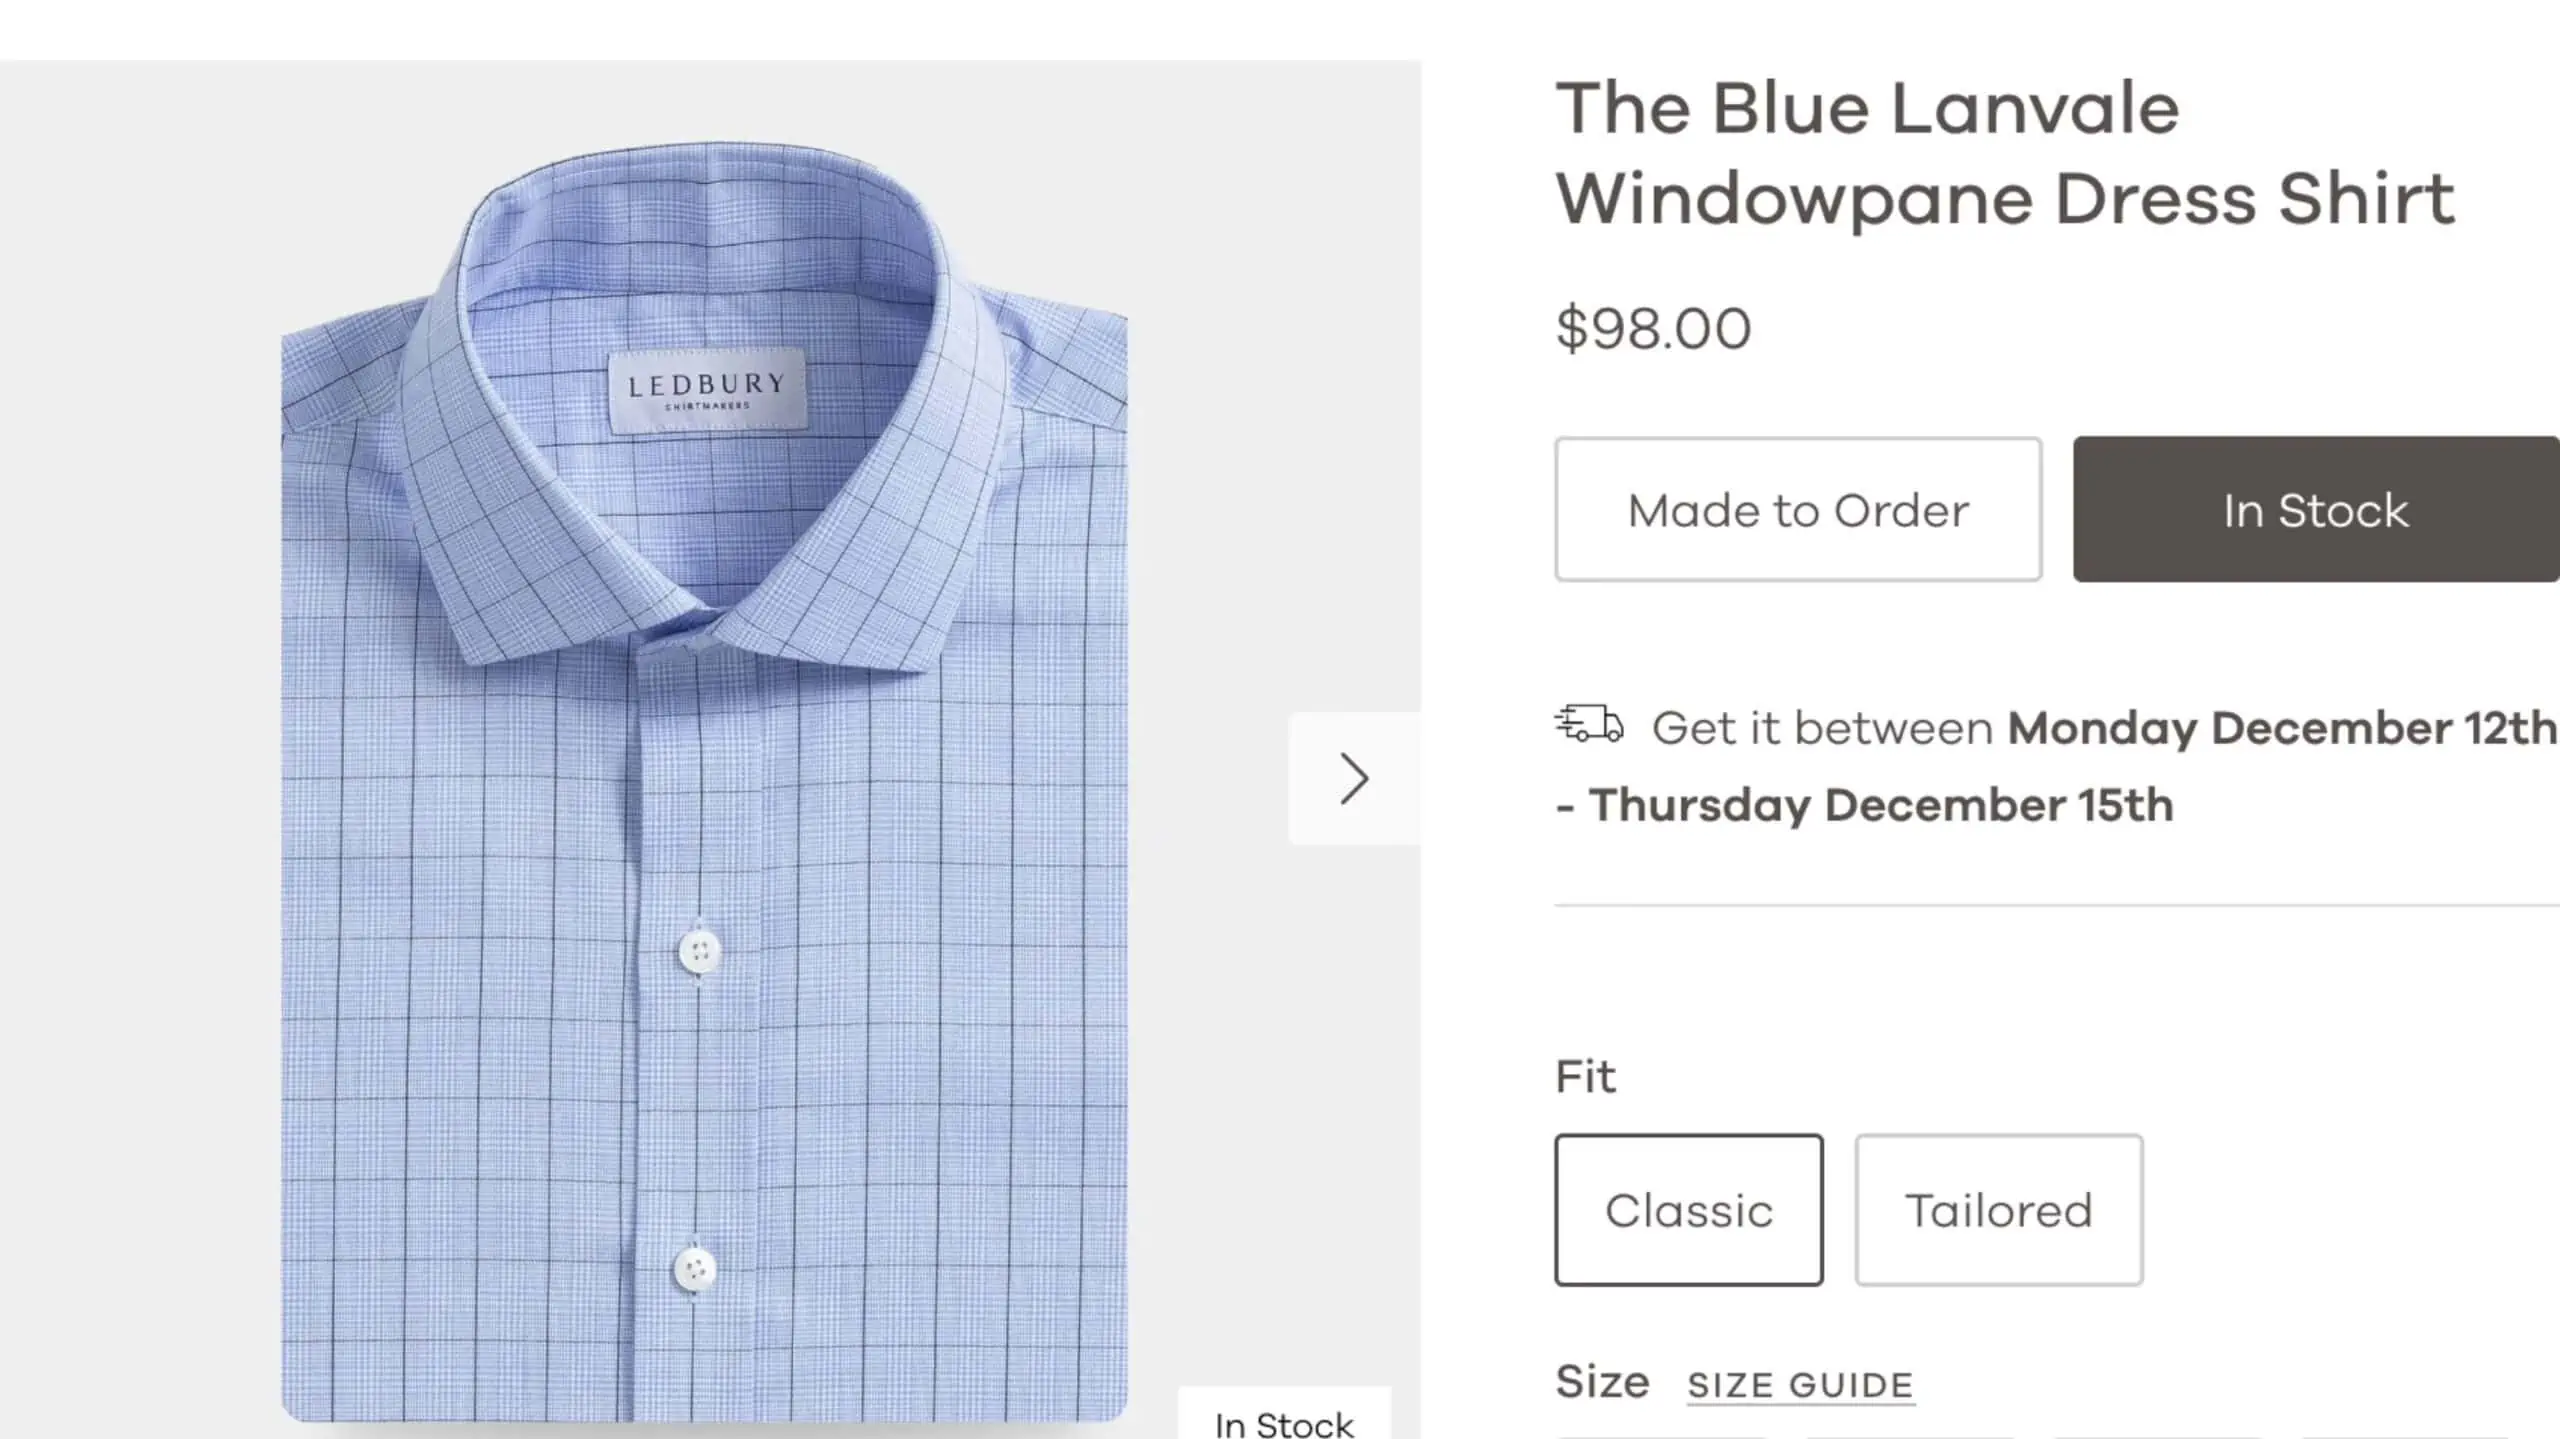 This Ledbury shirt is in Albini fabrics which are made-to-measure shirts.